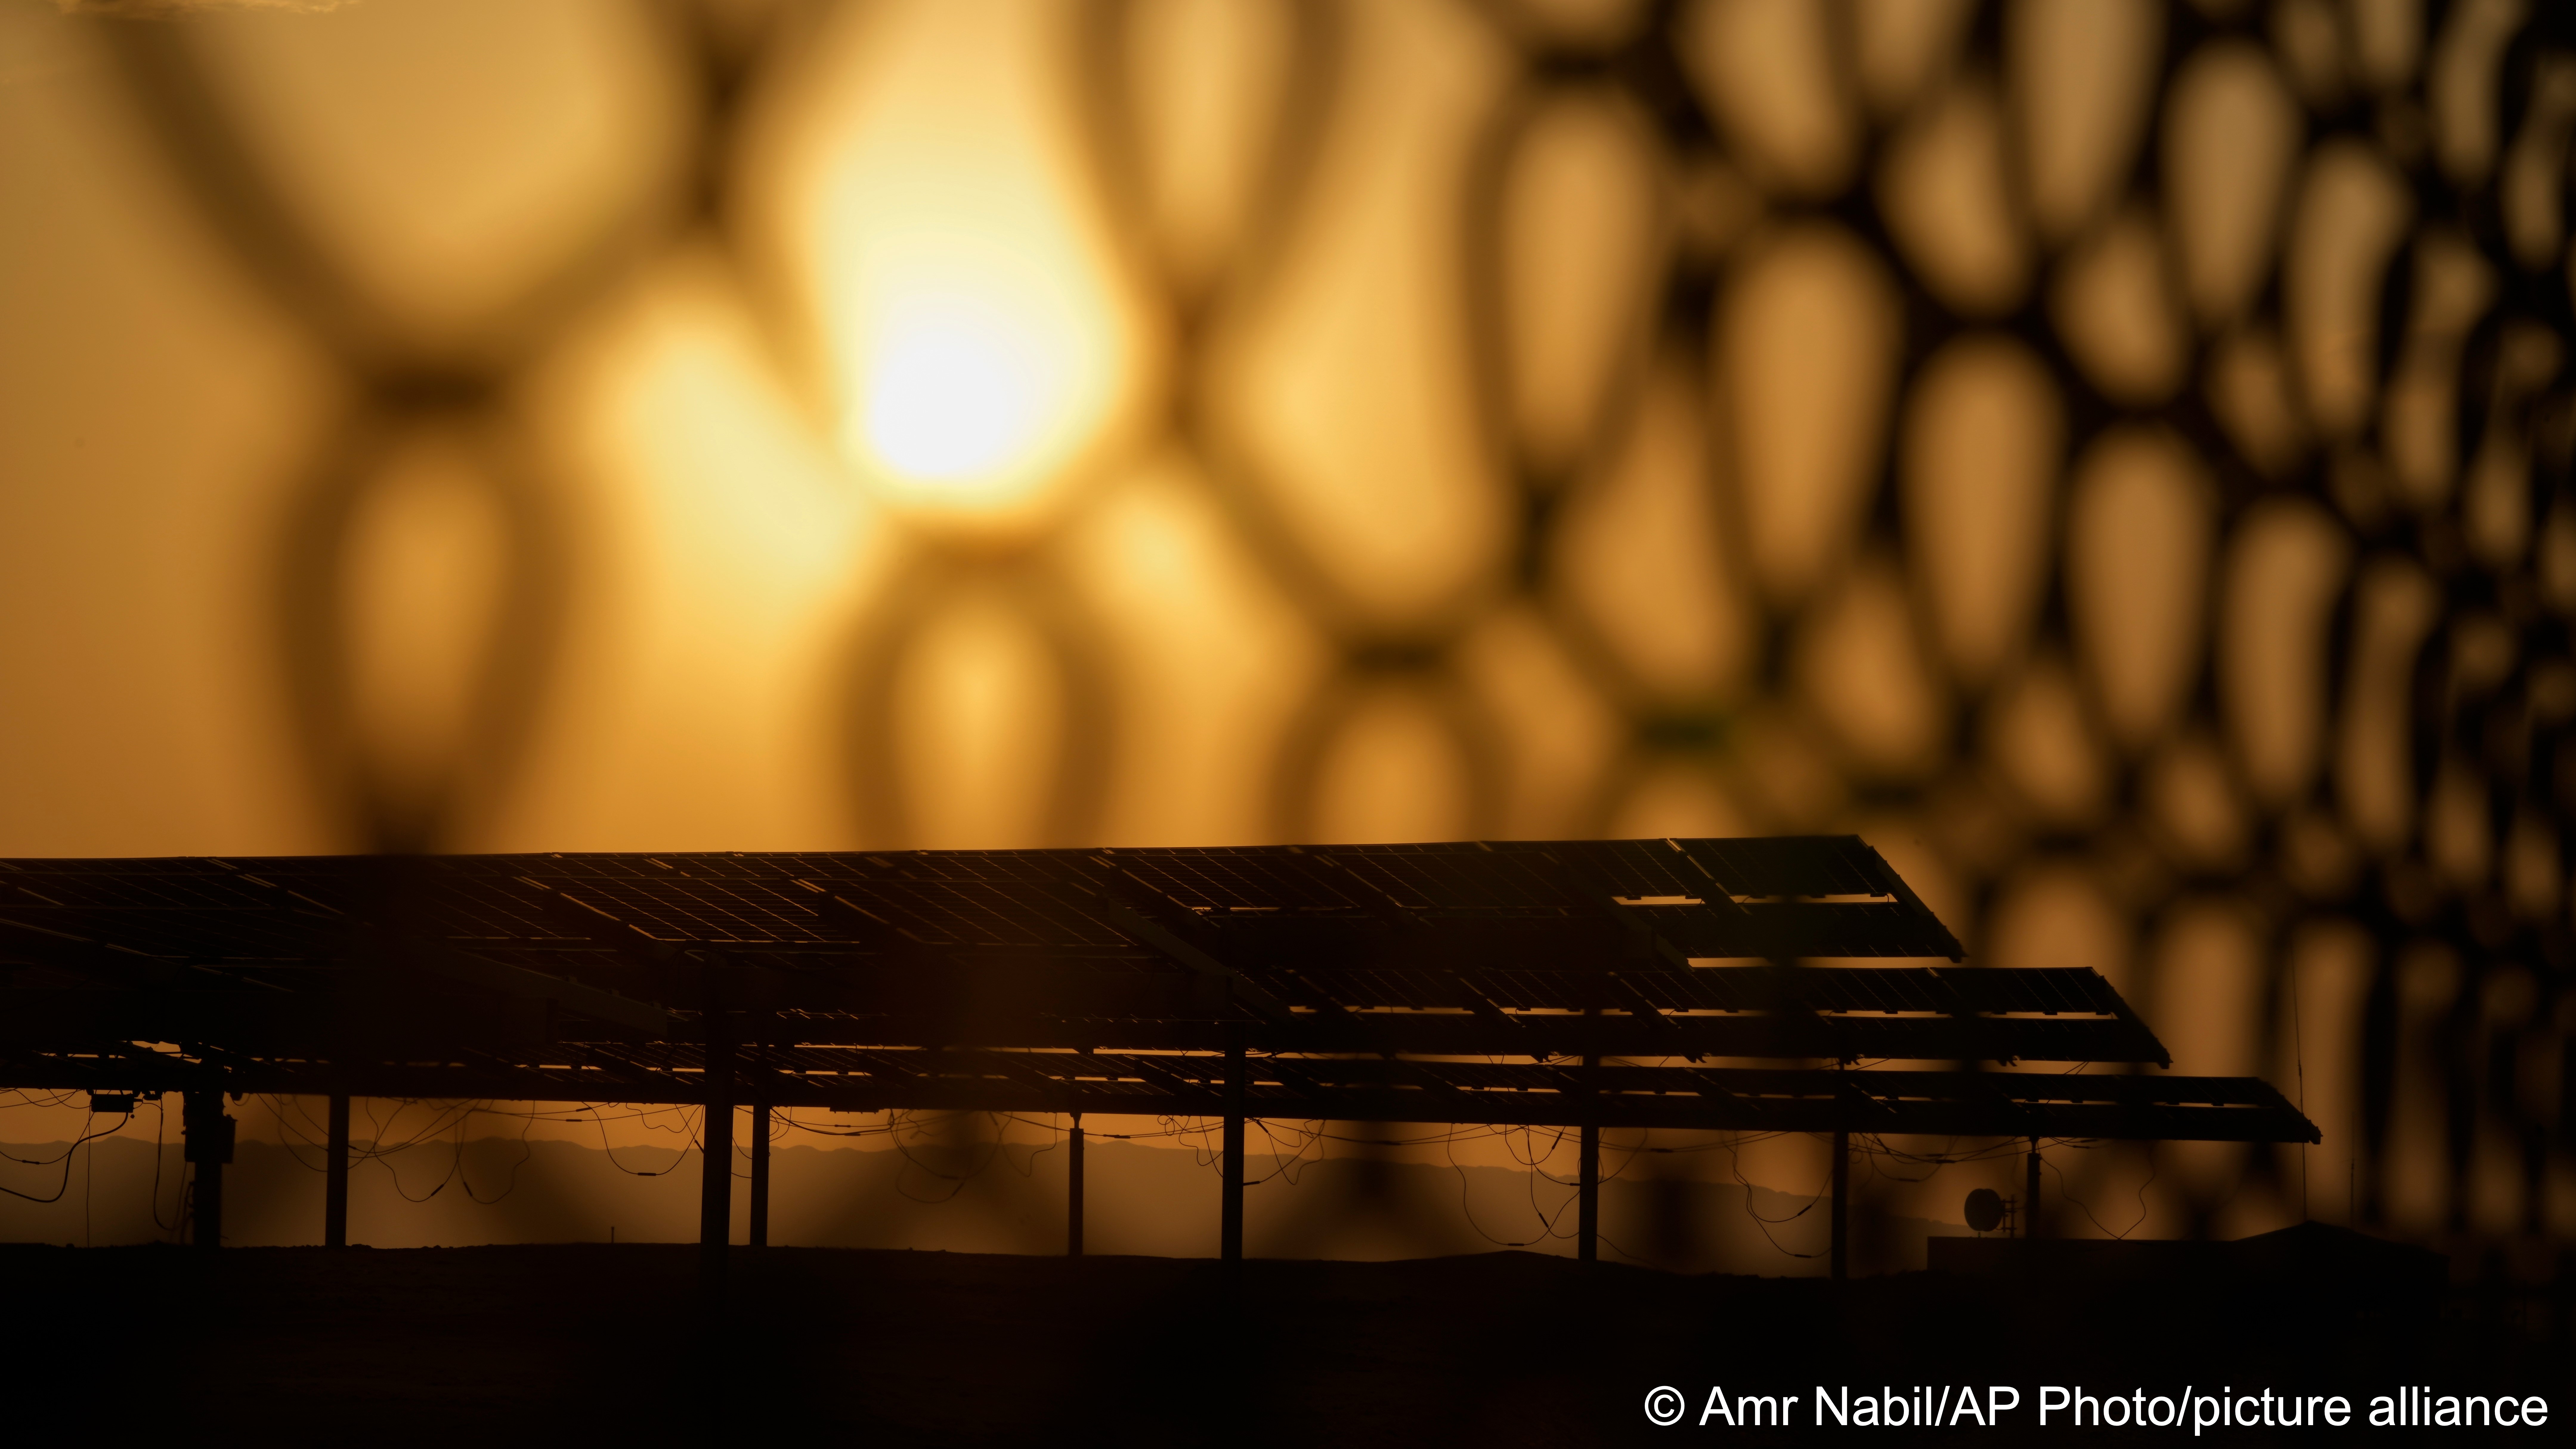 The sun sets behind photovoltaic solar panels at Benban Solar Park, one of the world’s largest solar power plants in the world, in Aswan, Egypt, 19 October 2022 (photo: AP Photo/Amr Nabil)